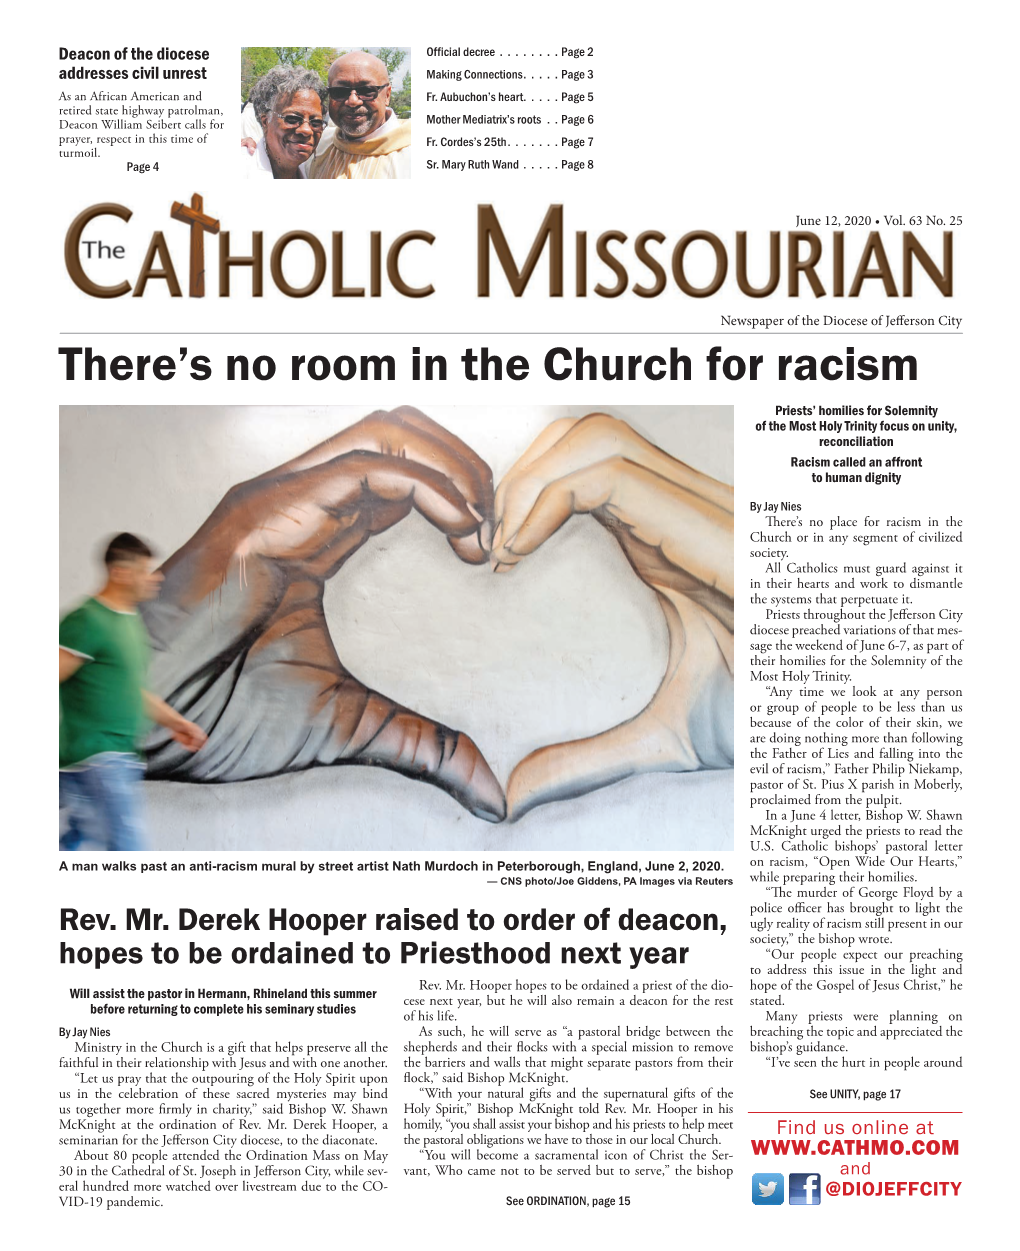 There's No Room in the Church for Racism